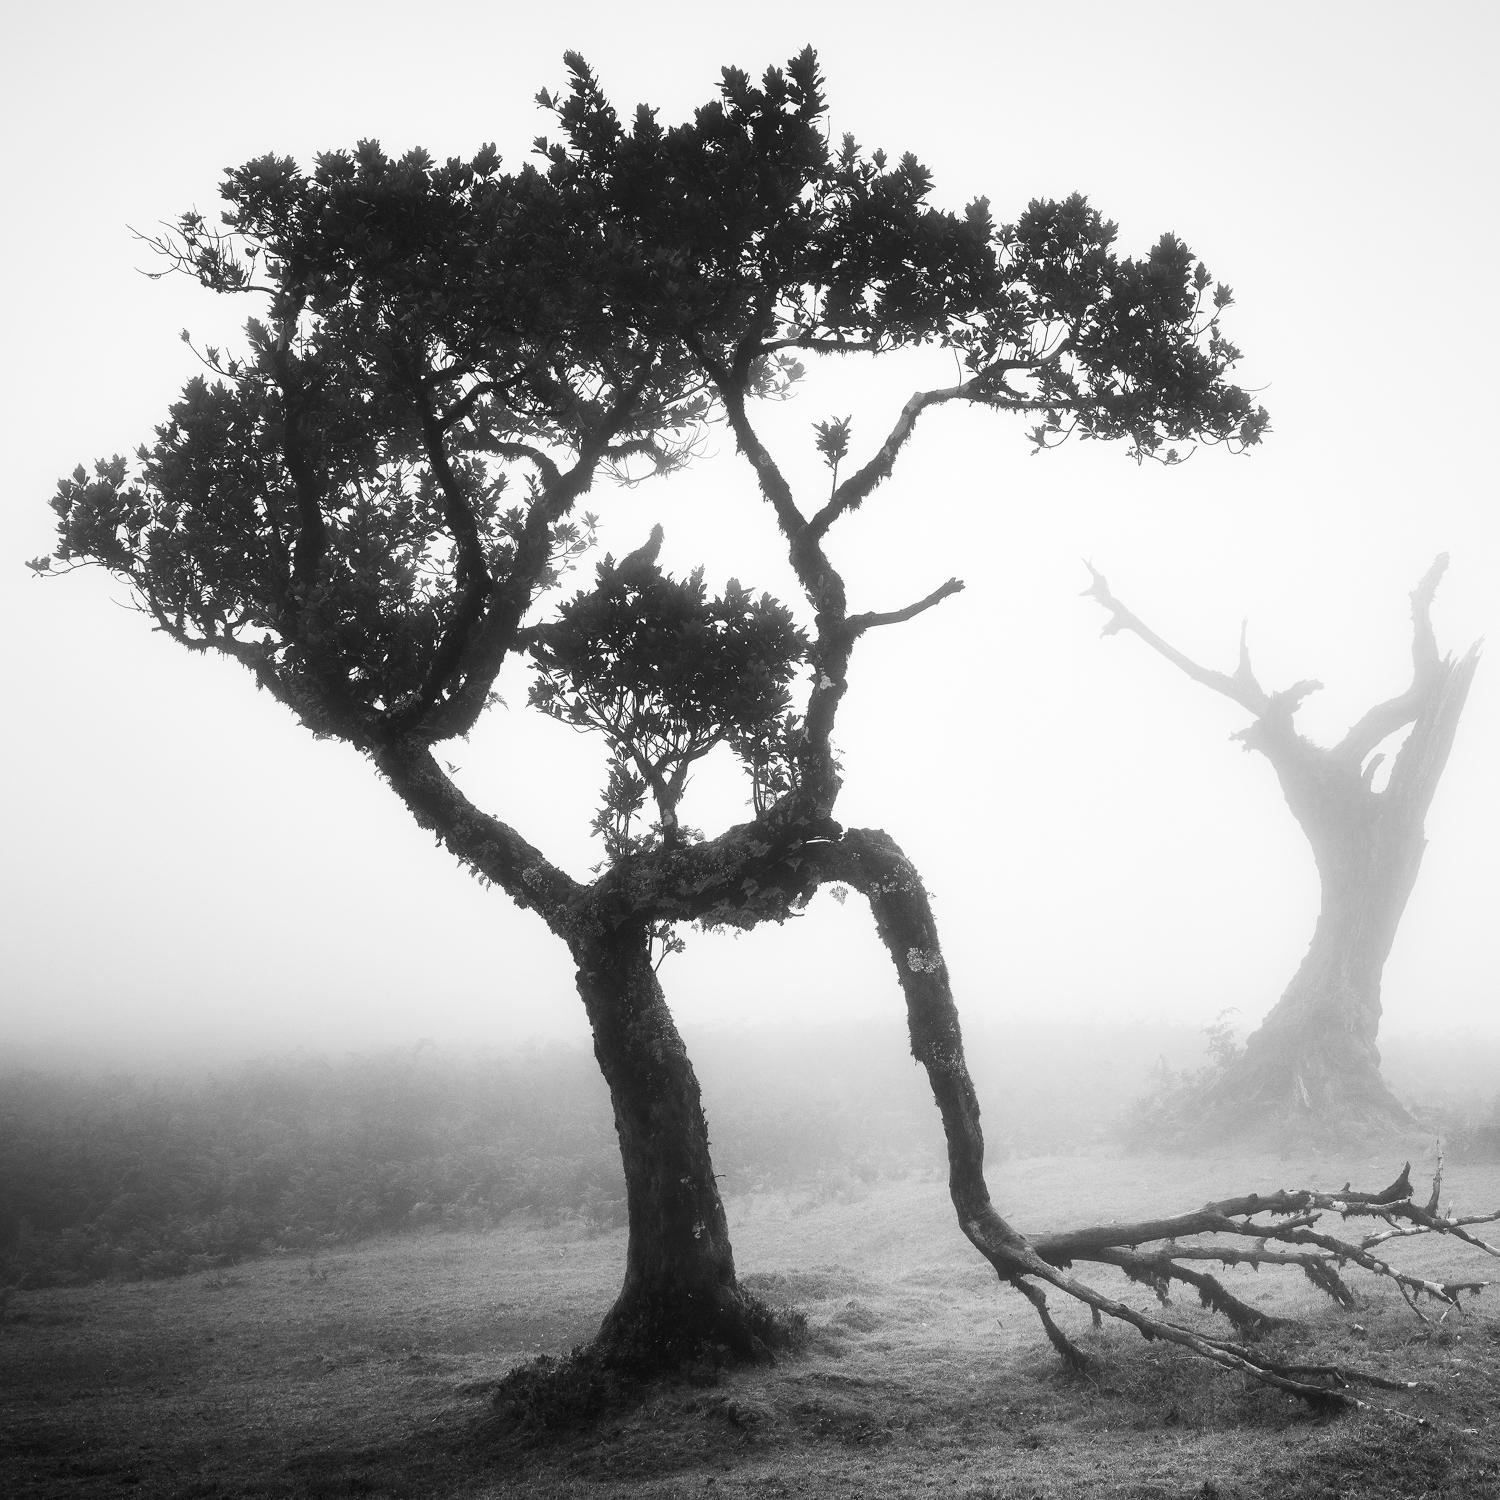  Ancient Laurel Cloud Forest, black and white photography, landscape, framed - Contemporary Photograph by Gerald Berghammer